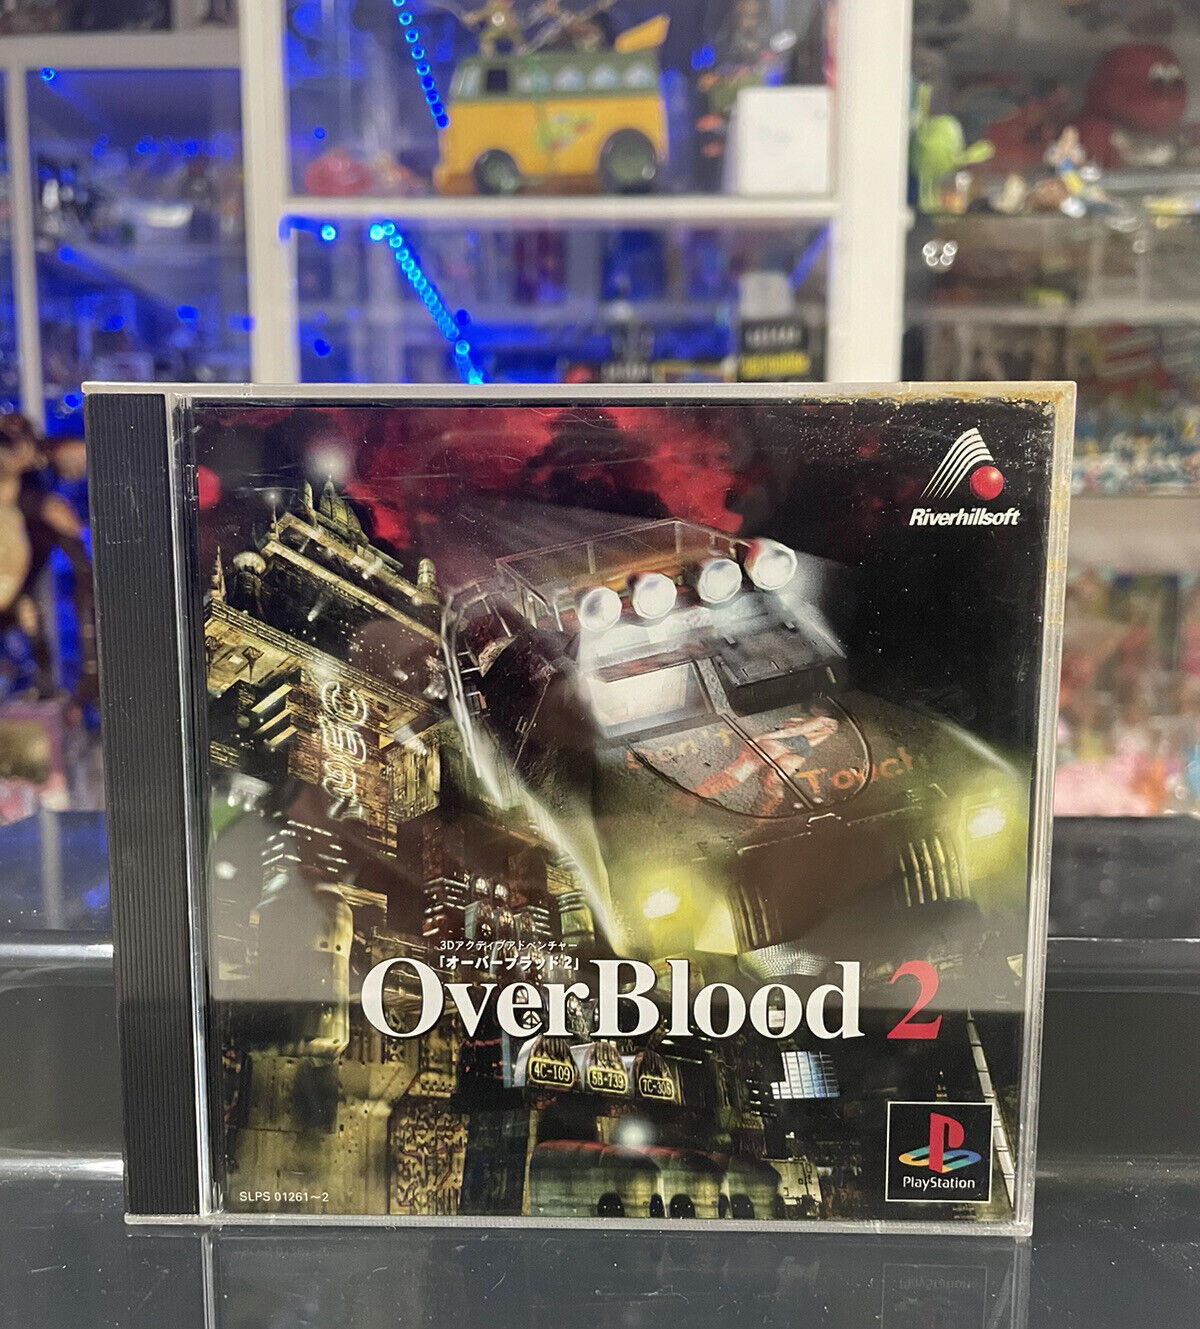 Ps1-OVERBLOOD-NTSC-jap-01261-Playstation-Sony-134387755282